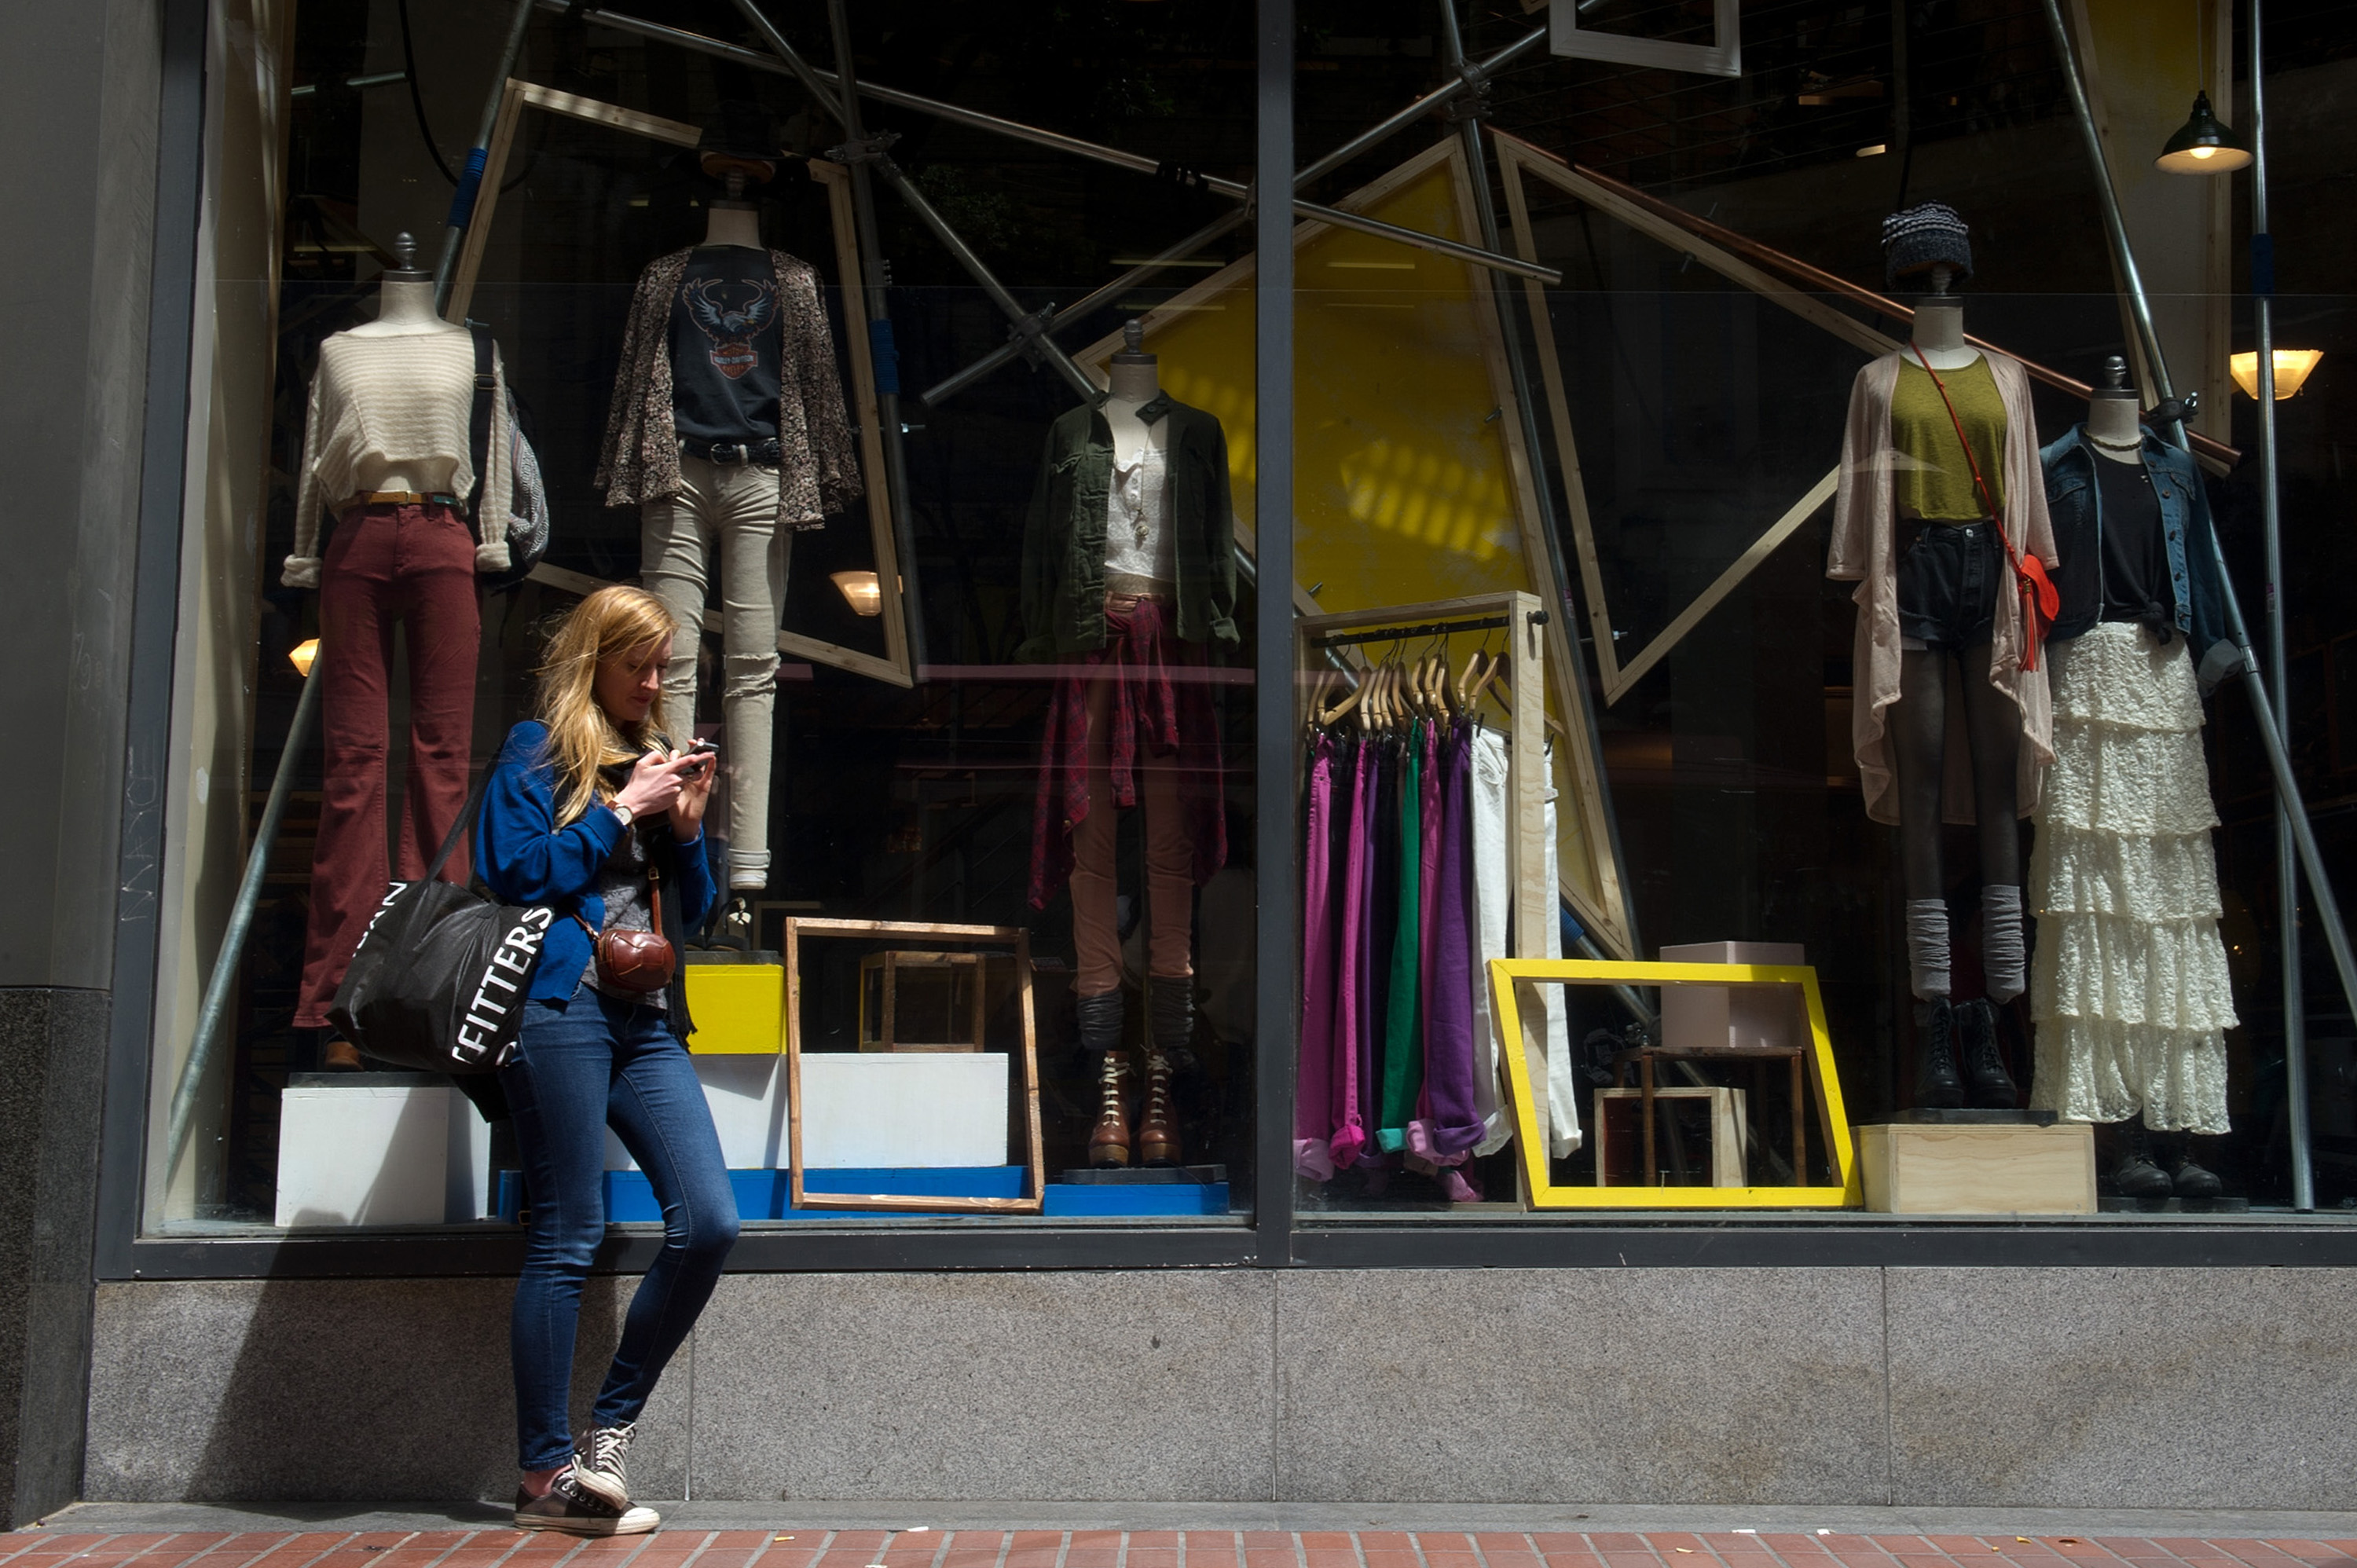 A woman checks her cell phone outside an Urban Outfitters store in San Francisco on Aug. 11, 2011.
